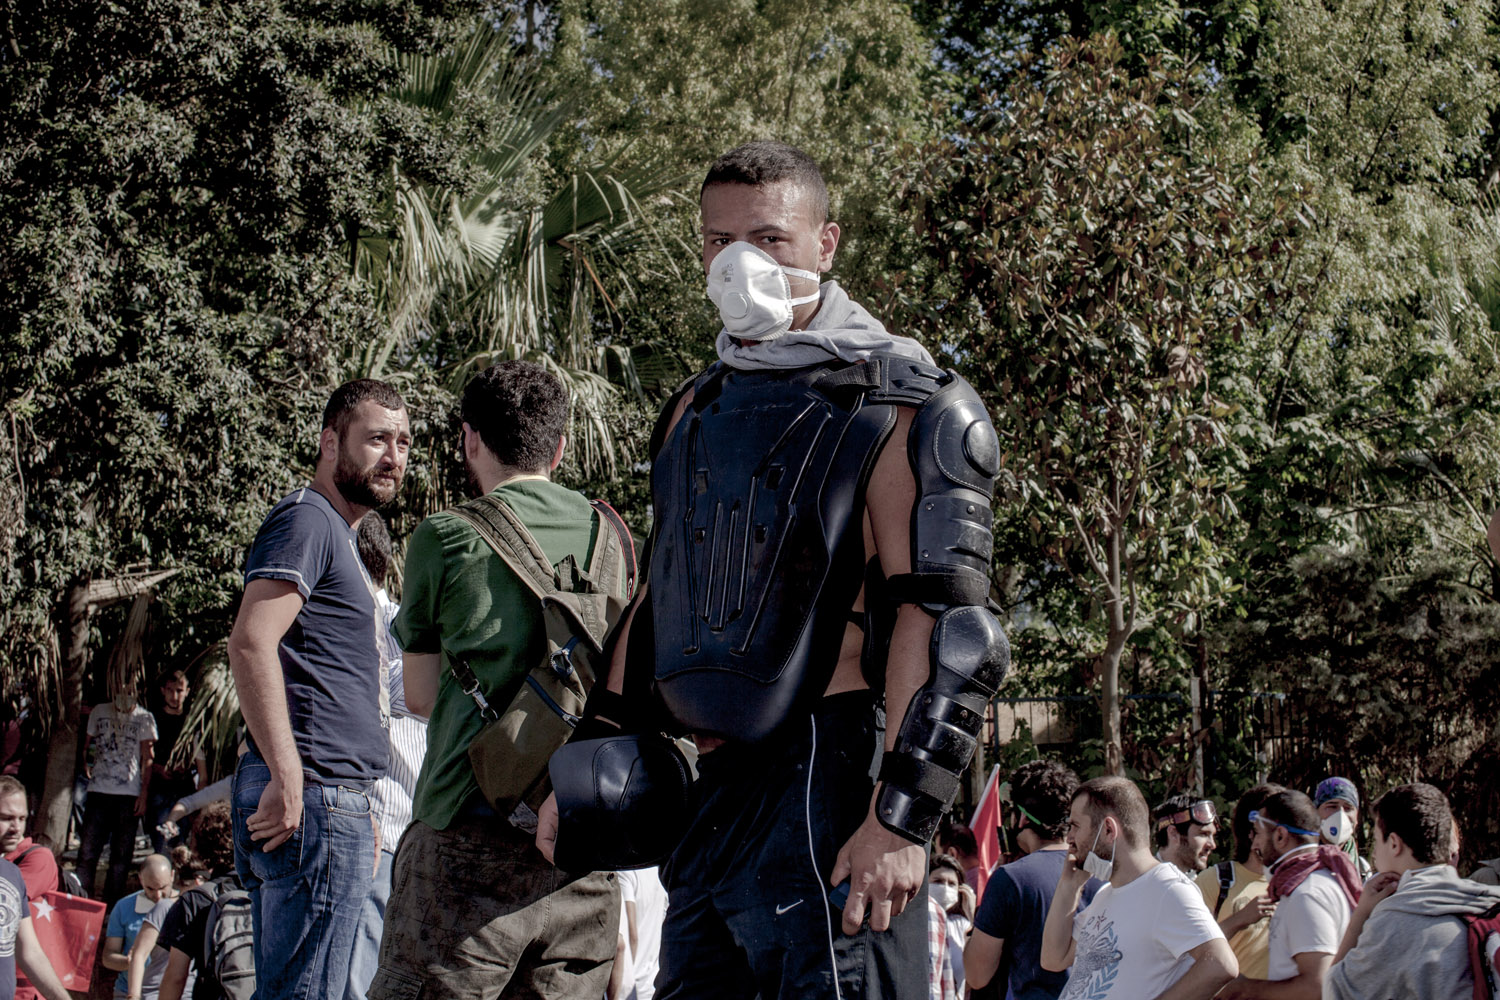 A protester wears the clothing of Istanbul's riot police as he watches the chaotic scenes around Gezi park.